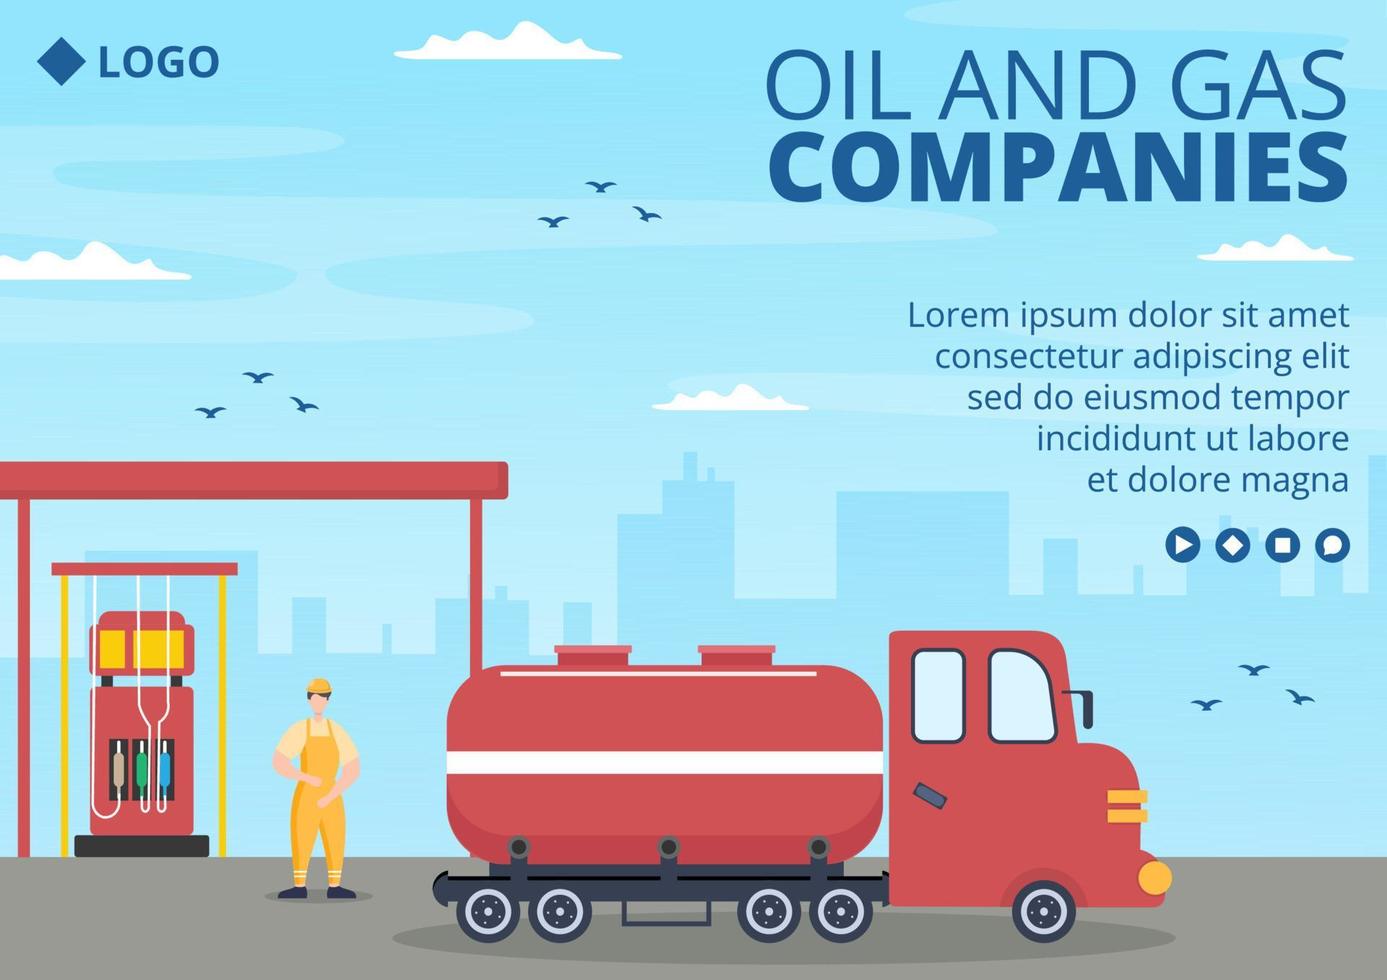 Oil Gas Industry Brochure Template Flat Design Illustration Editable of Square Background for Social Media or Greetings Card vector